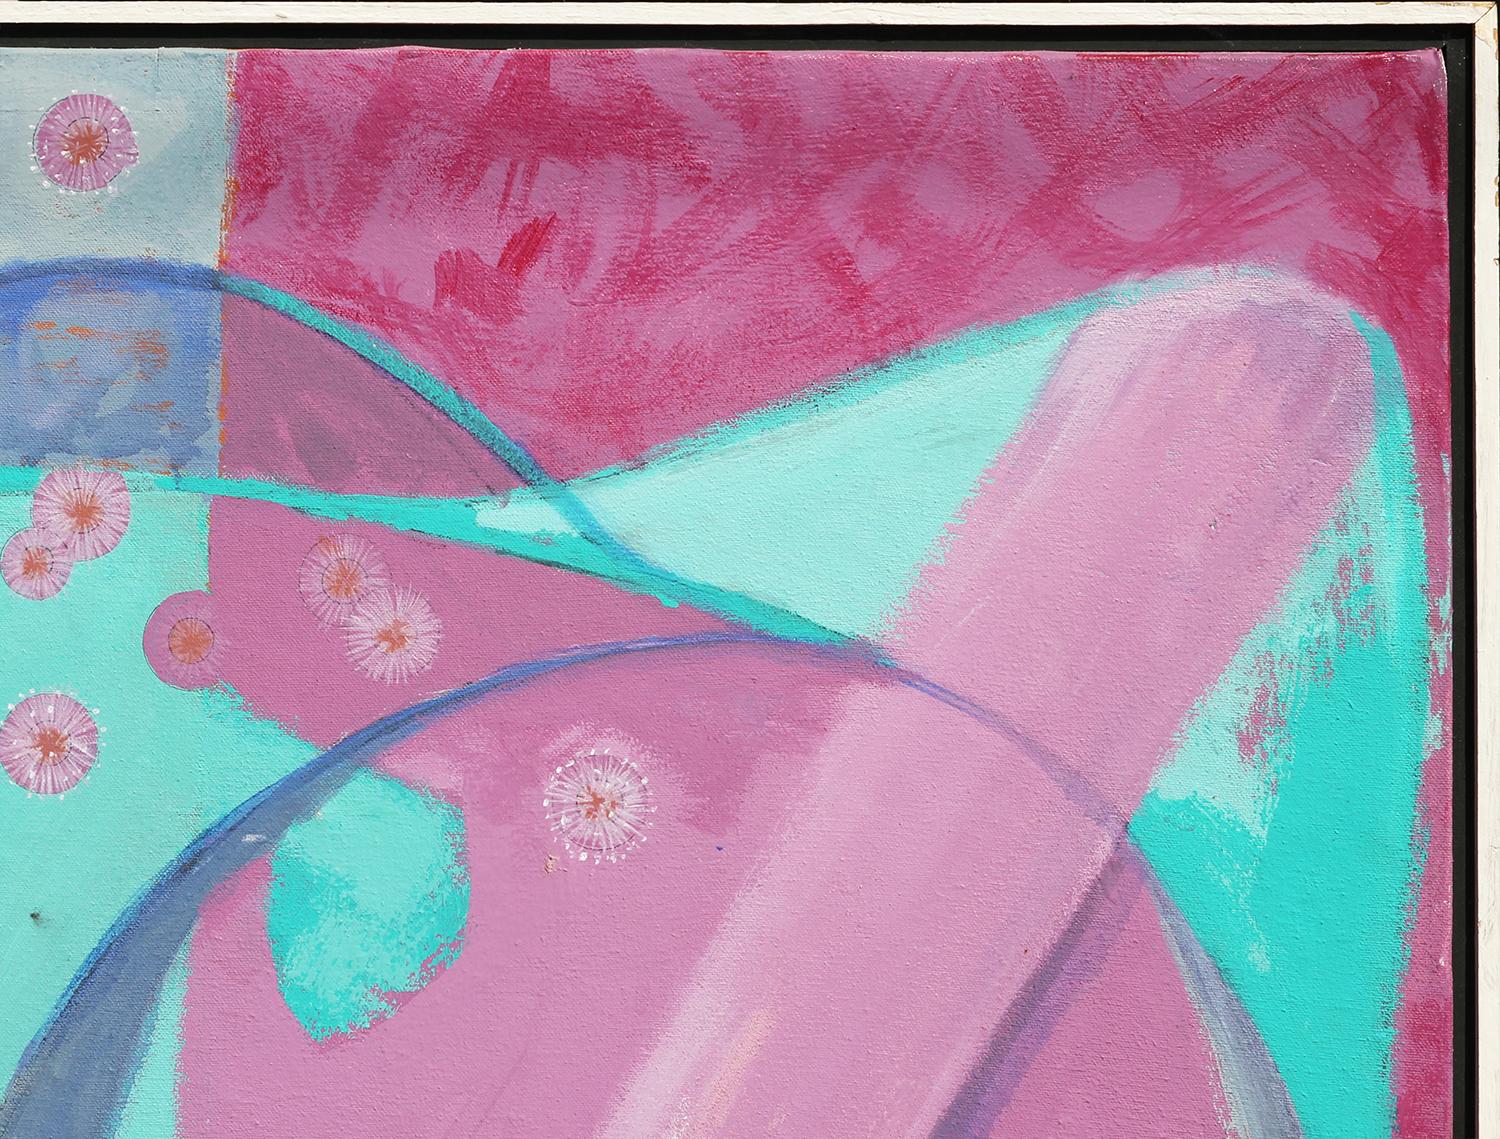 Pink, purple, and blue modern abstract animal painting by Texas artist Bob Fowler. The piece features a colorful abstracted animal, possibly a pig, against a divided pink and purple background. The work is signed and dated in front lower right